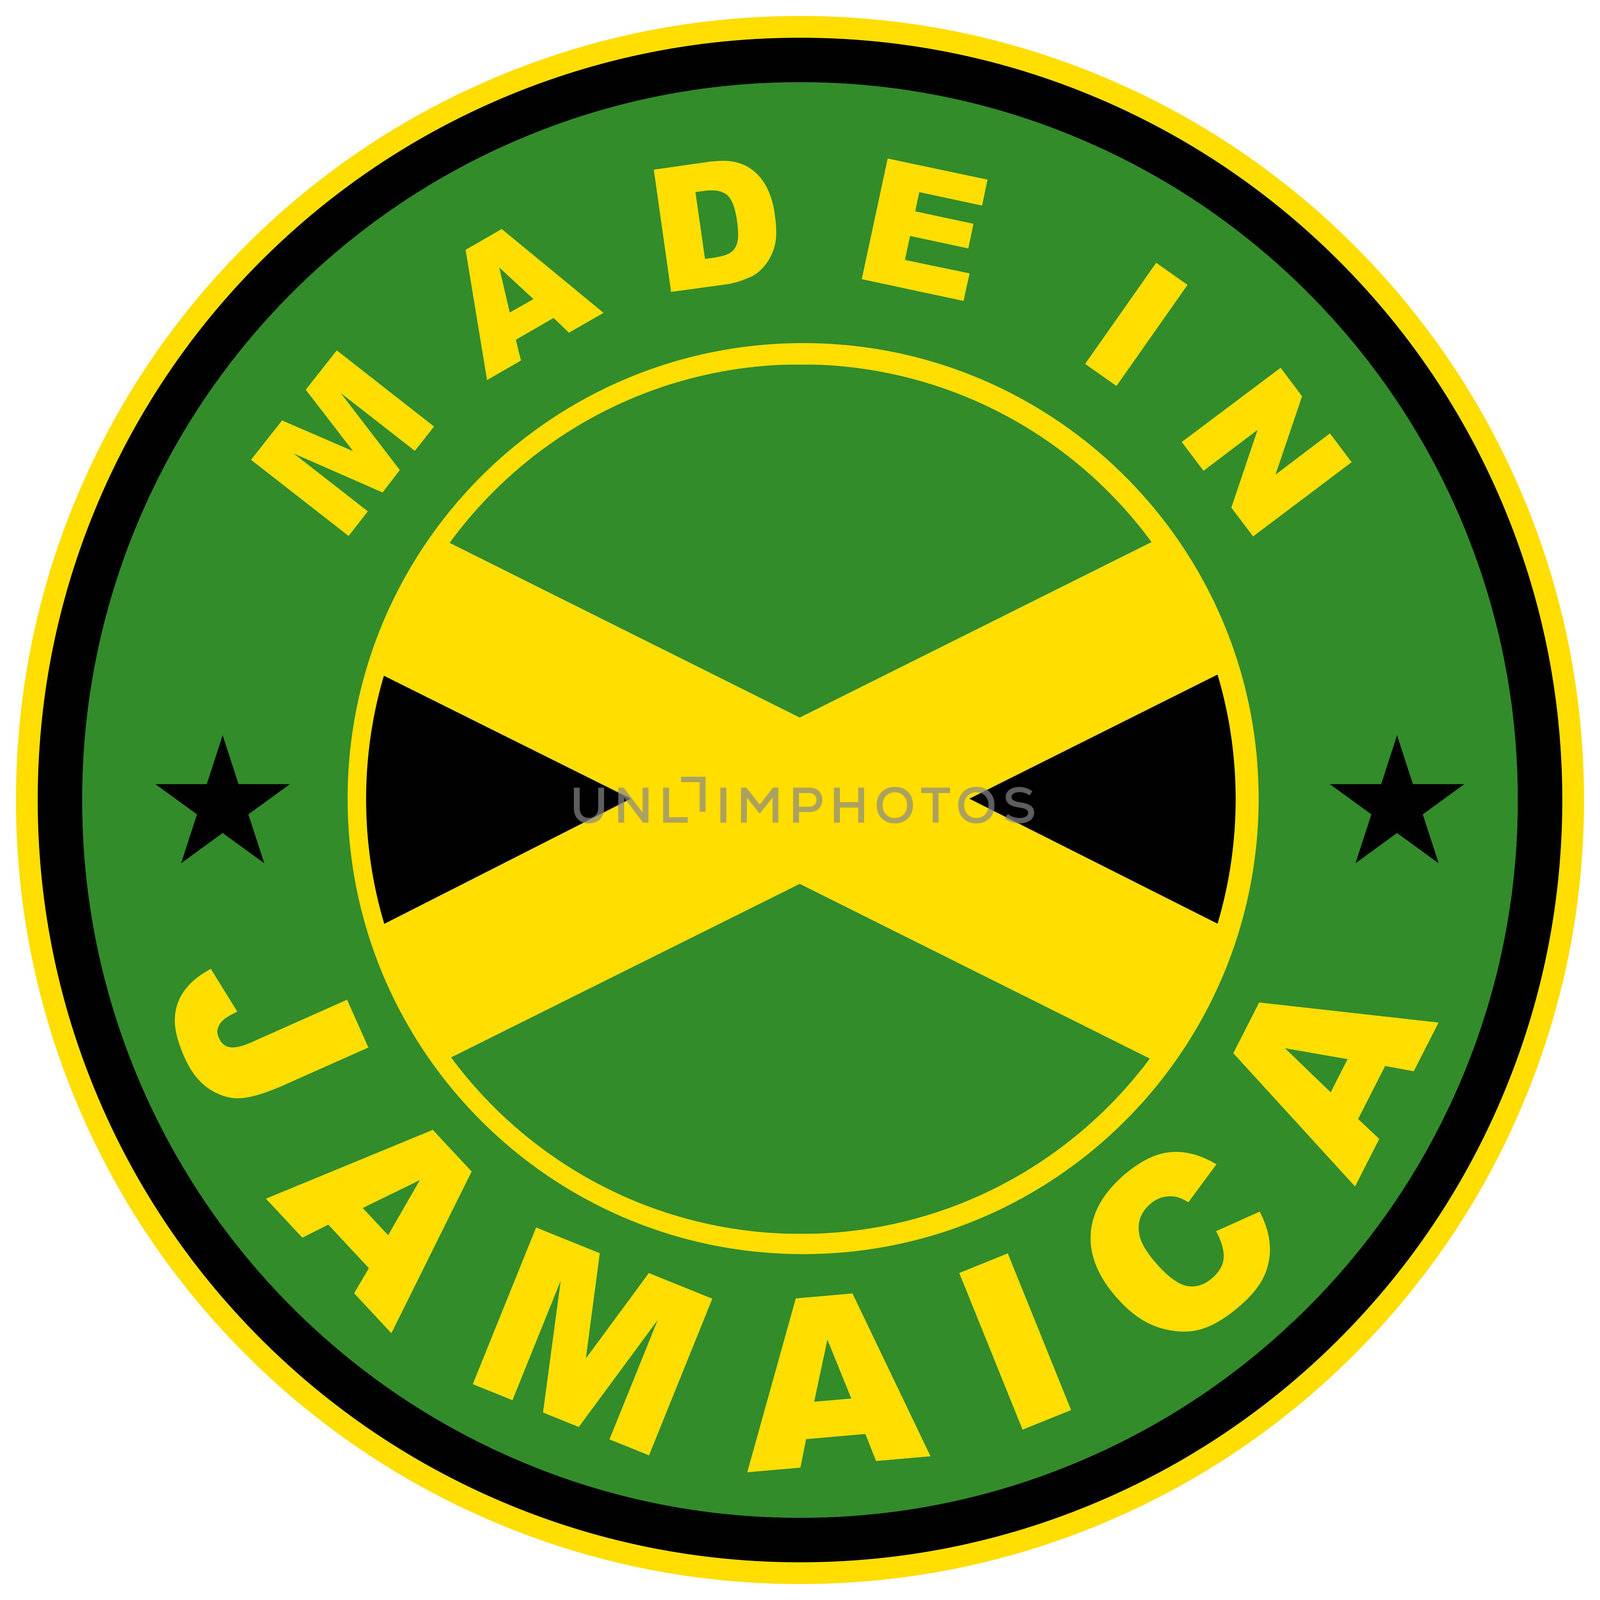 made in jamaica by tony4urban